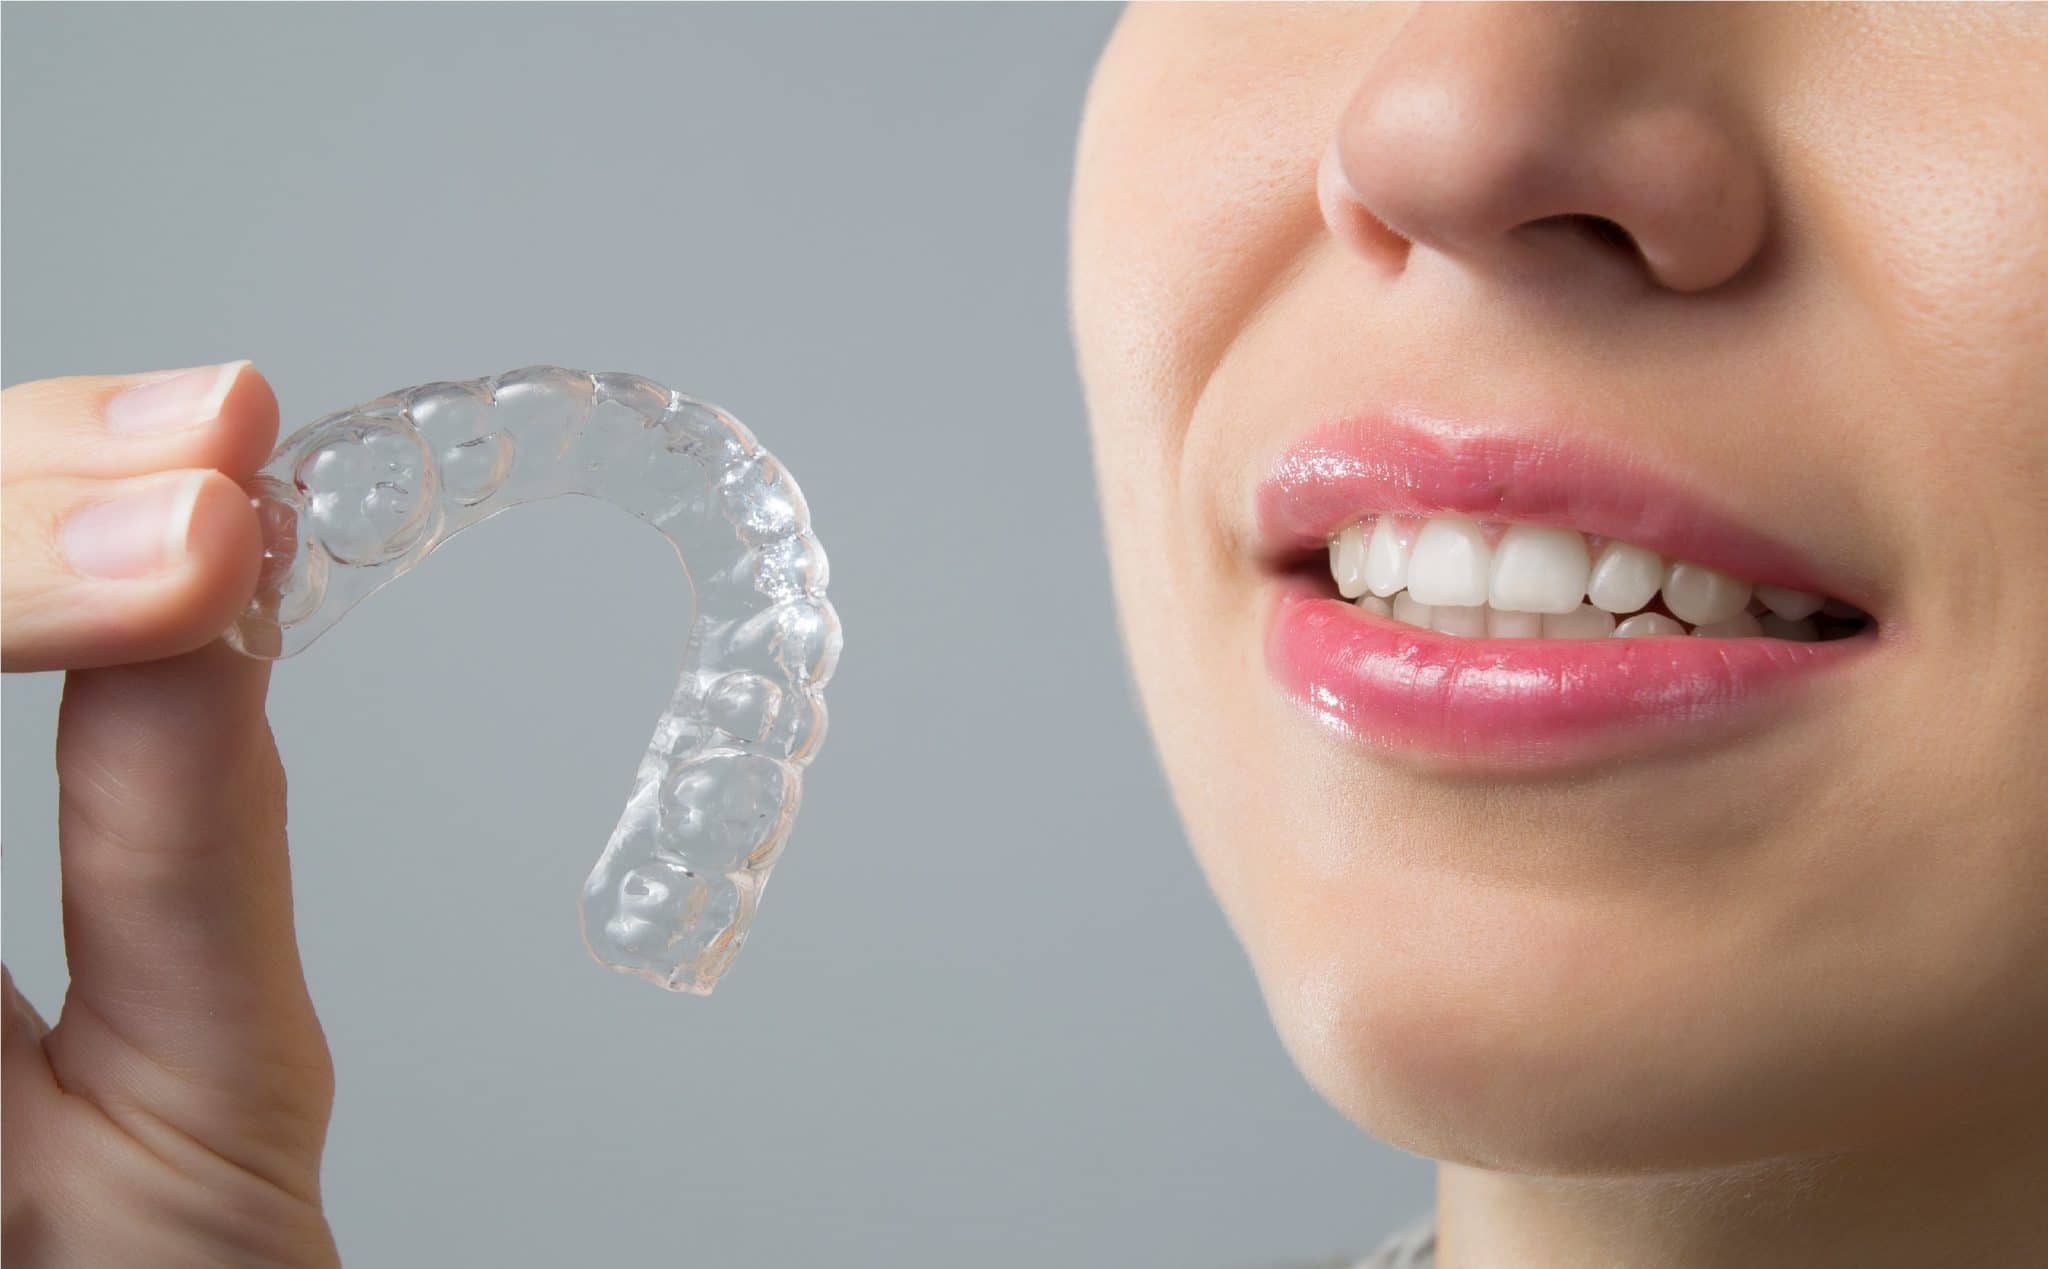 Smiling Woman with silicone trainer. Invisible braces